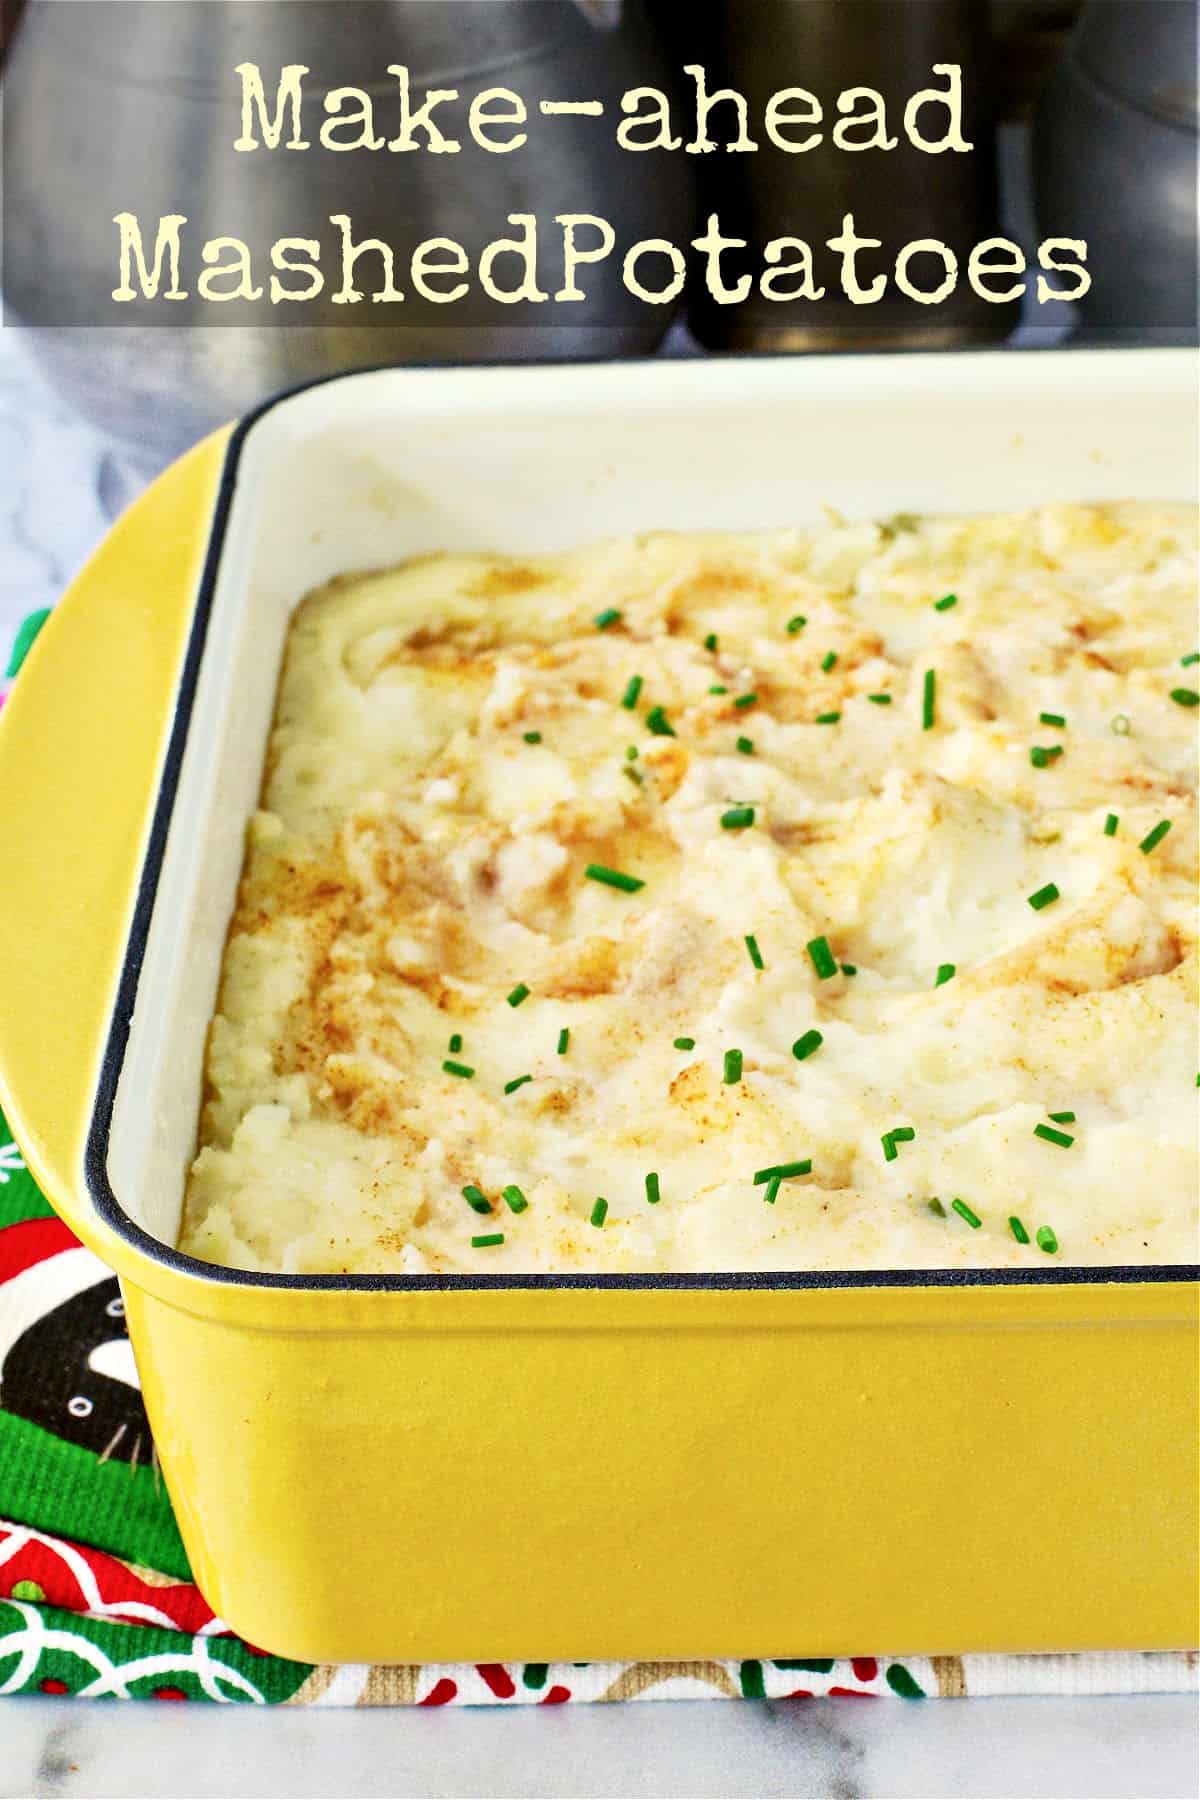 Make Ahead Mashed Potatoes in a yellow casserole dish.